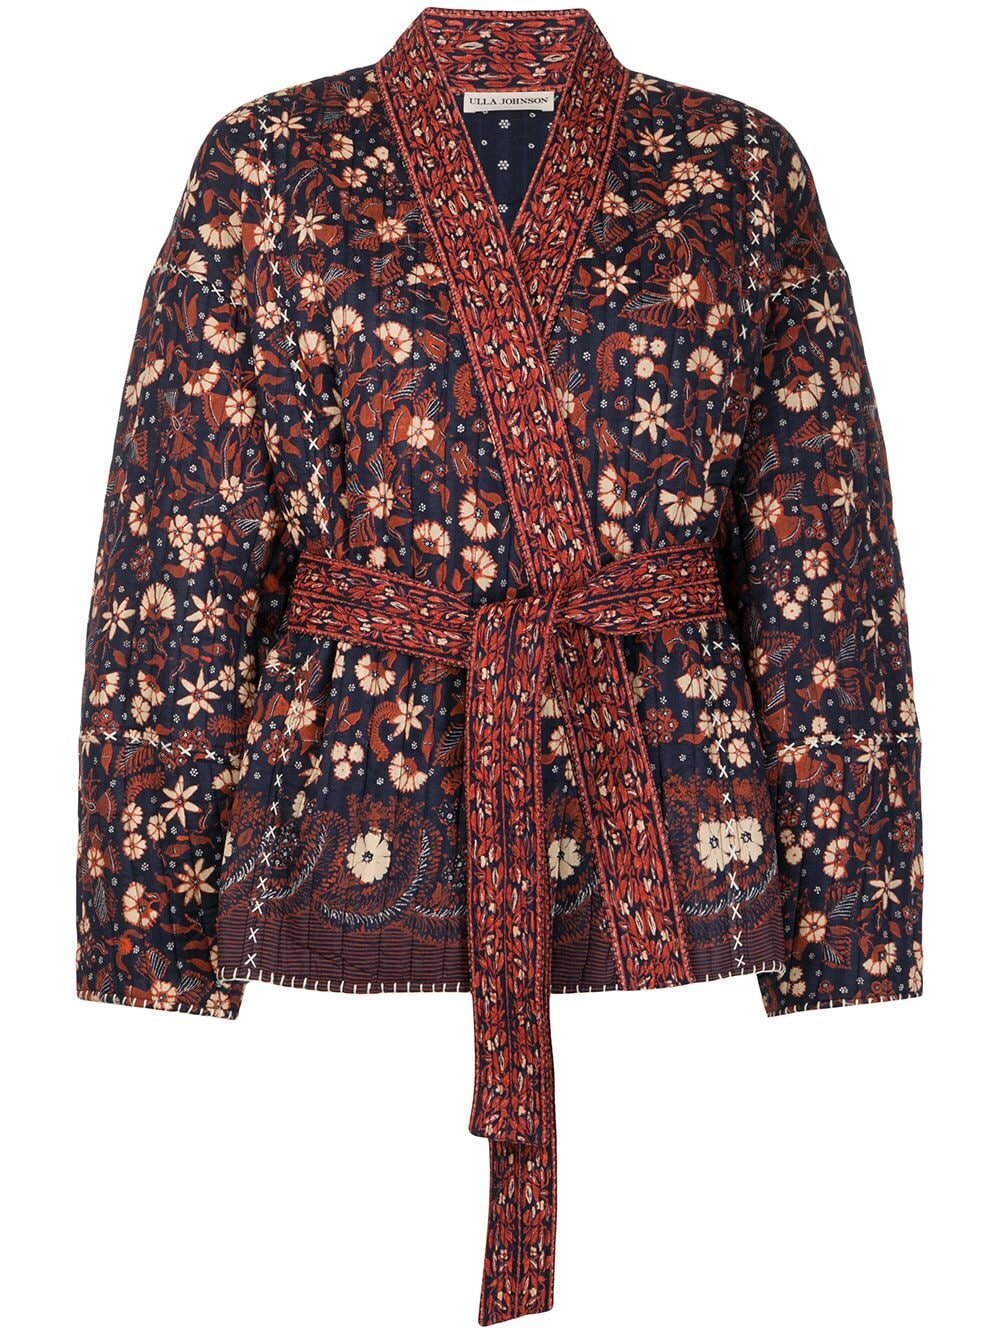 Ulla Johnson quilted jacket